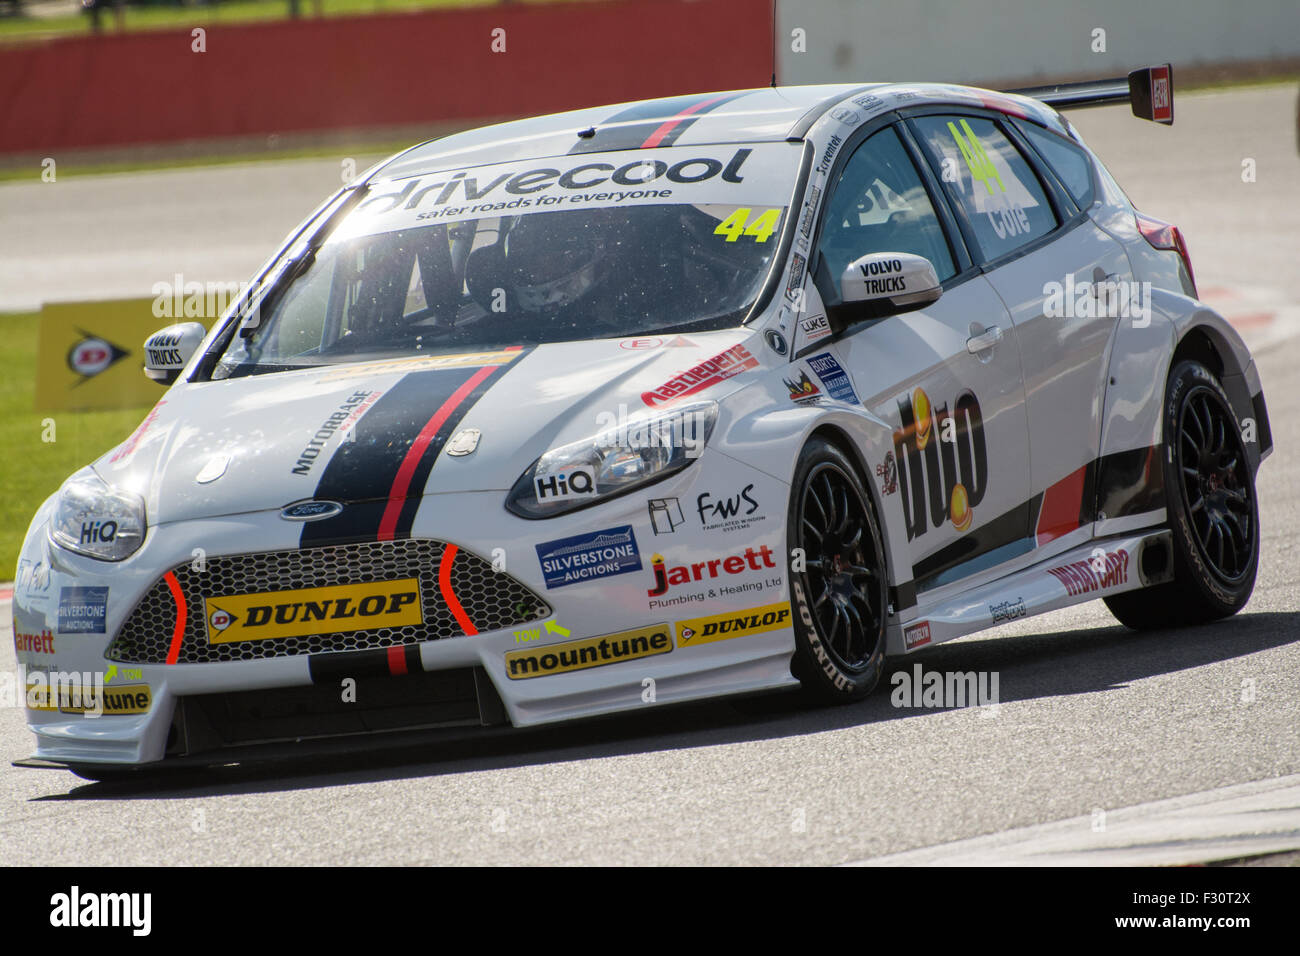 Silverstone, Northamptonshire, UK. 27th Sep, 2015. James Cole and Motorbase Performance drives during Race 1 of the Dunlop MSA British Touring Car Championship at Silverstone Circuit on September 27, 2015 in Silverstone, United Kingdom (Photo by Gergo Toth Photo / Alamy Live News) Credit:  Gergo Toth/Alamy Live News Stock Photo